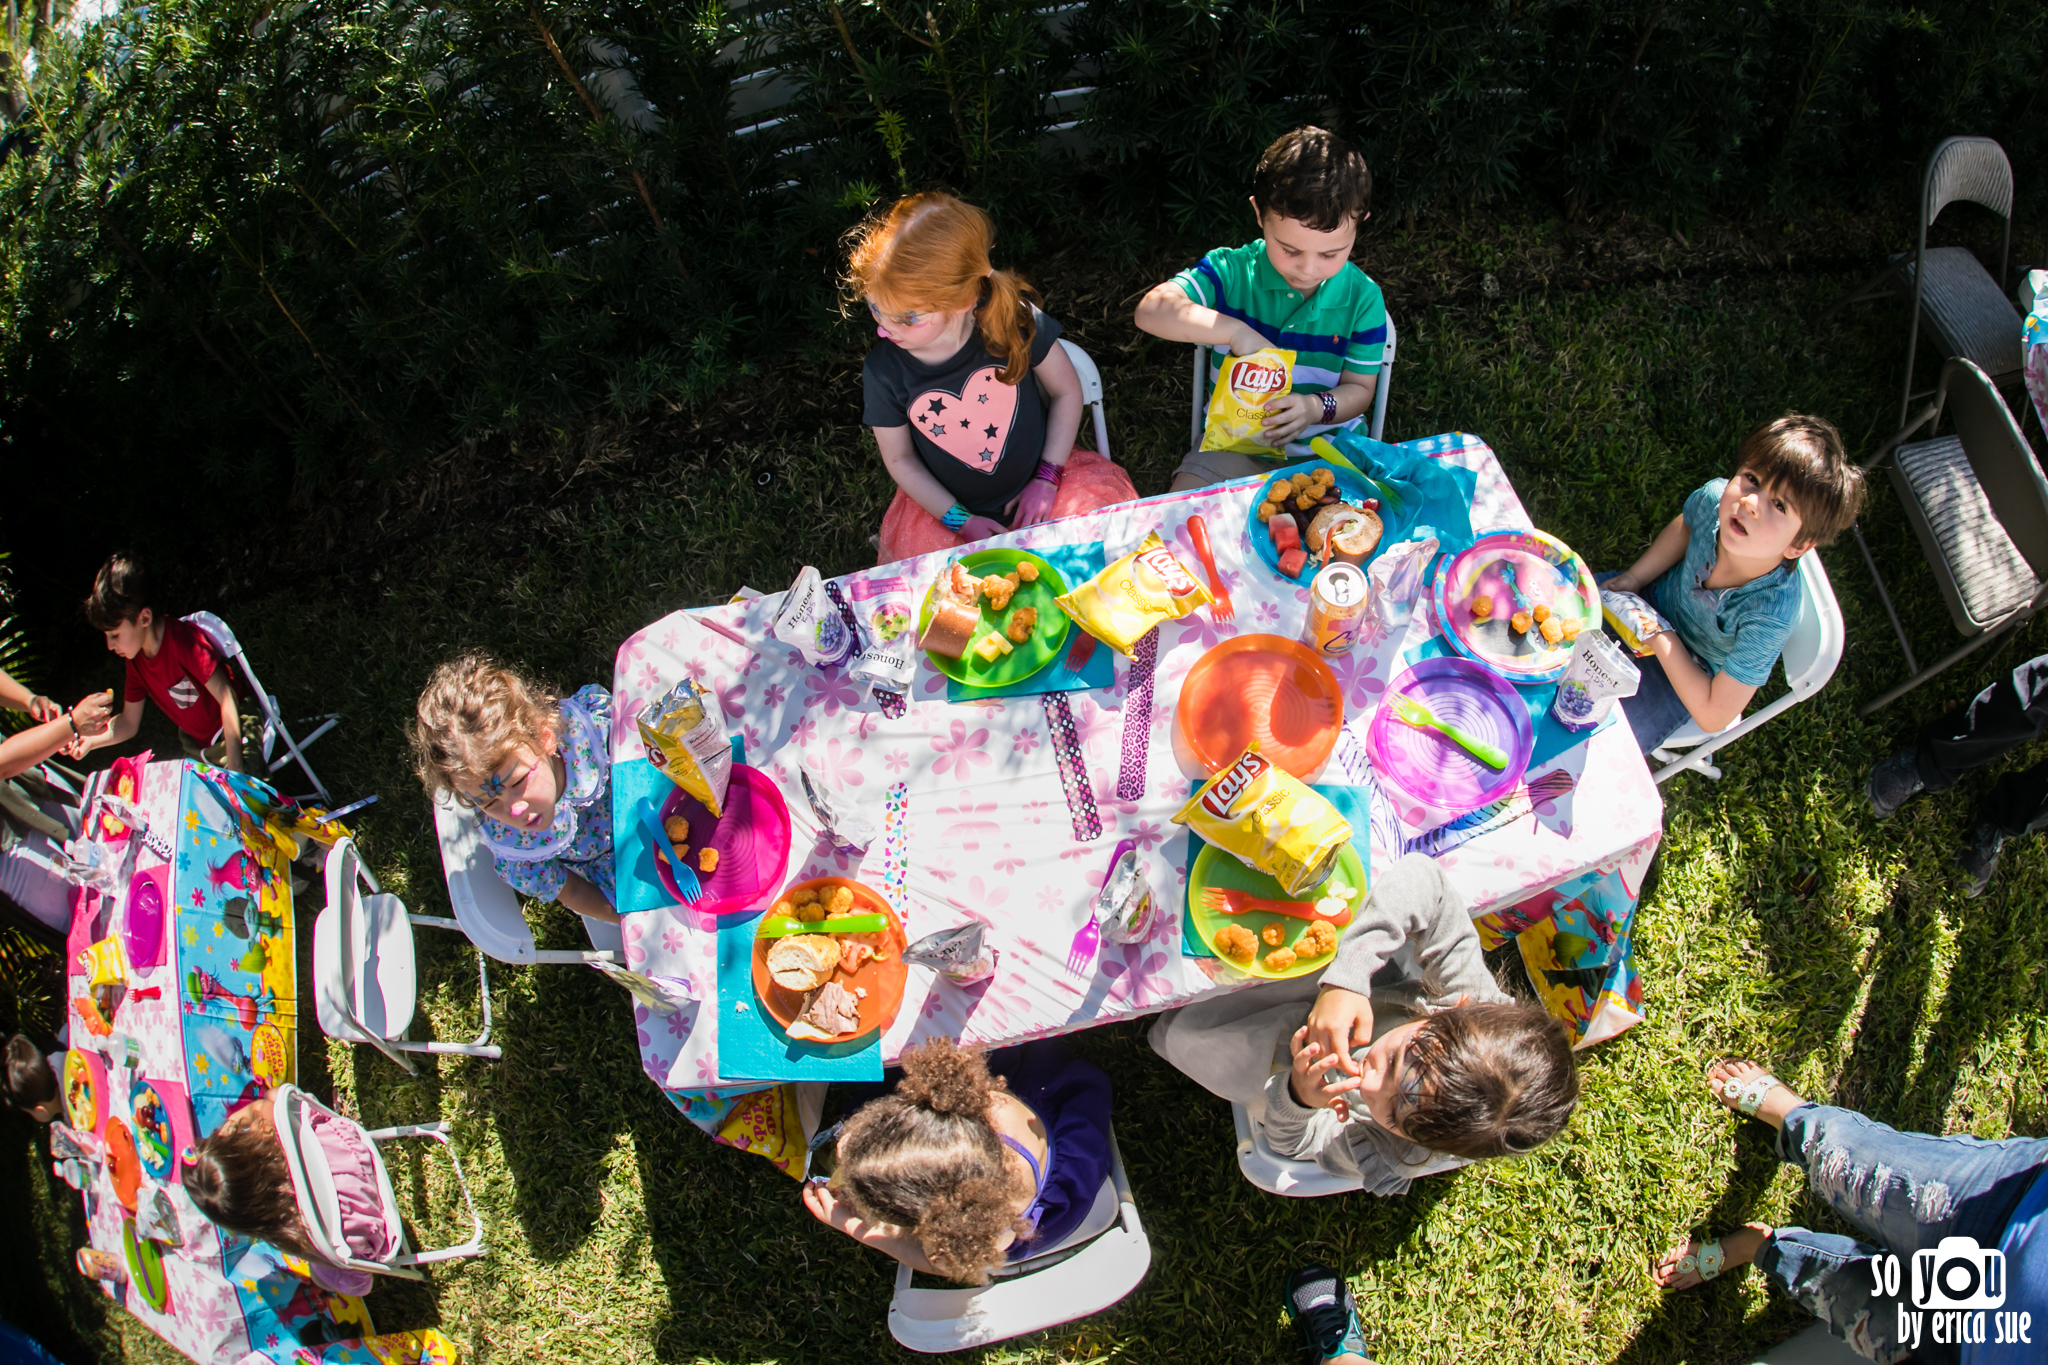 family-photography-so-you-by-erica-sue-ft-lauderdale-fl-florida-trolls-movie-birthday-party-3144.jpg